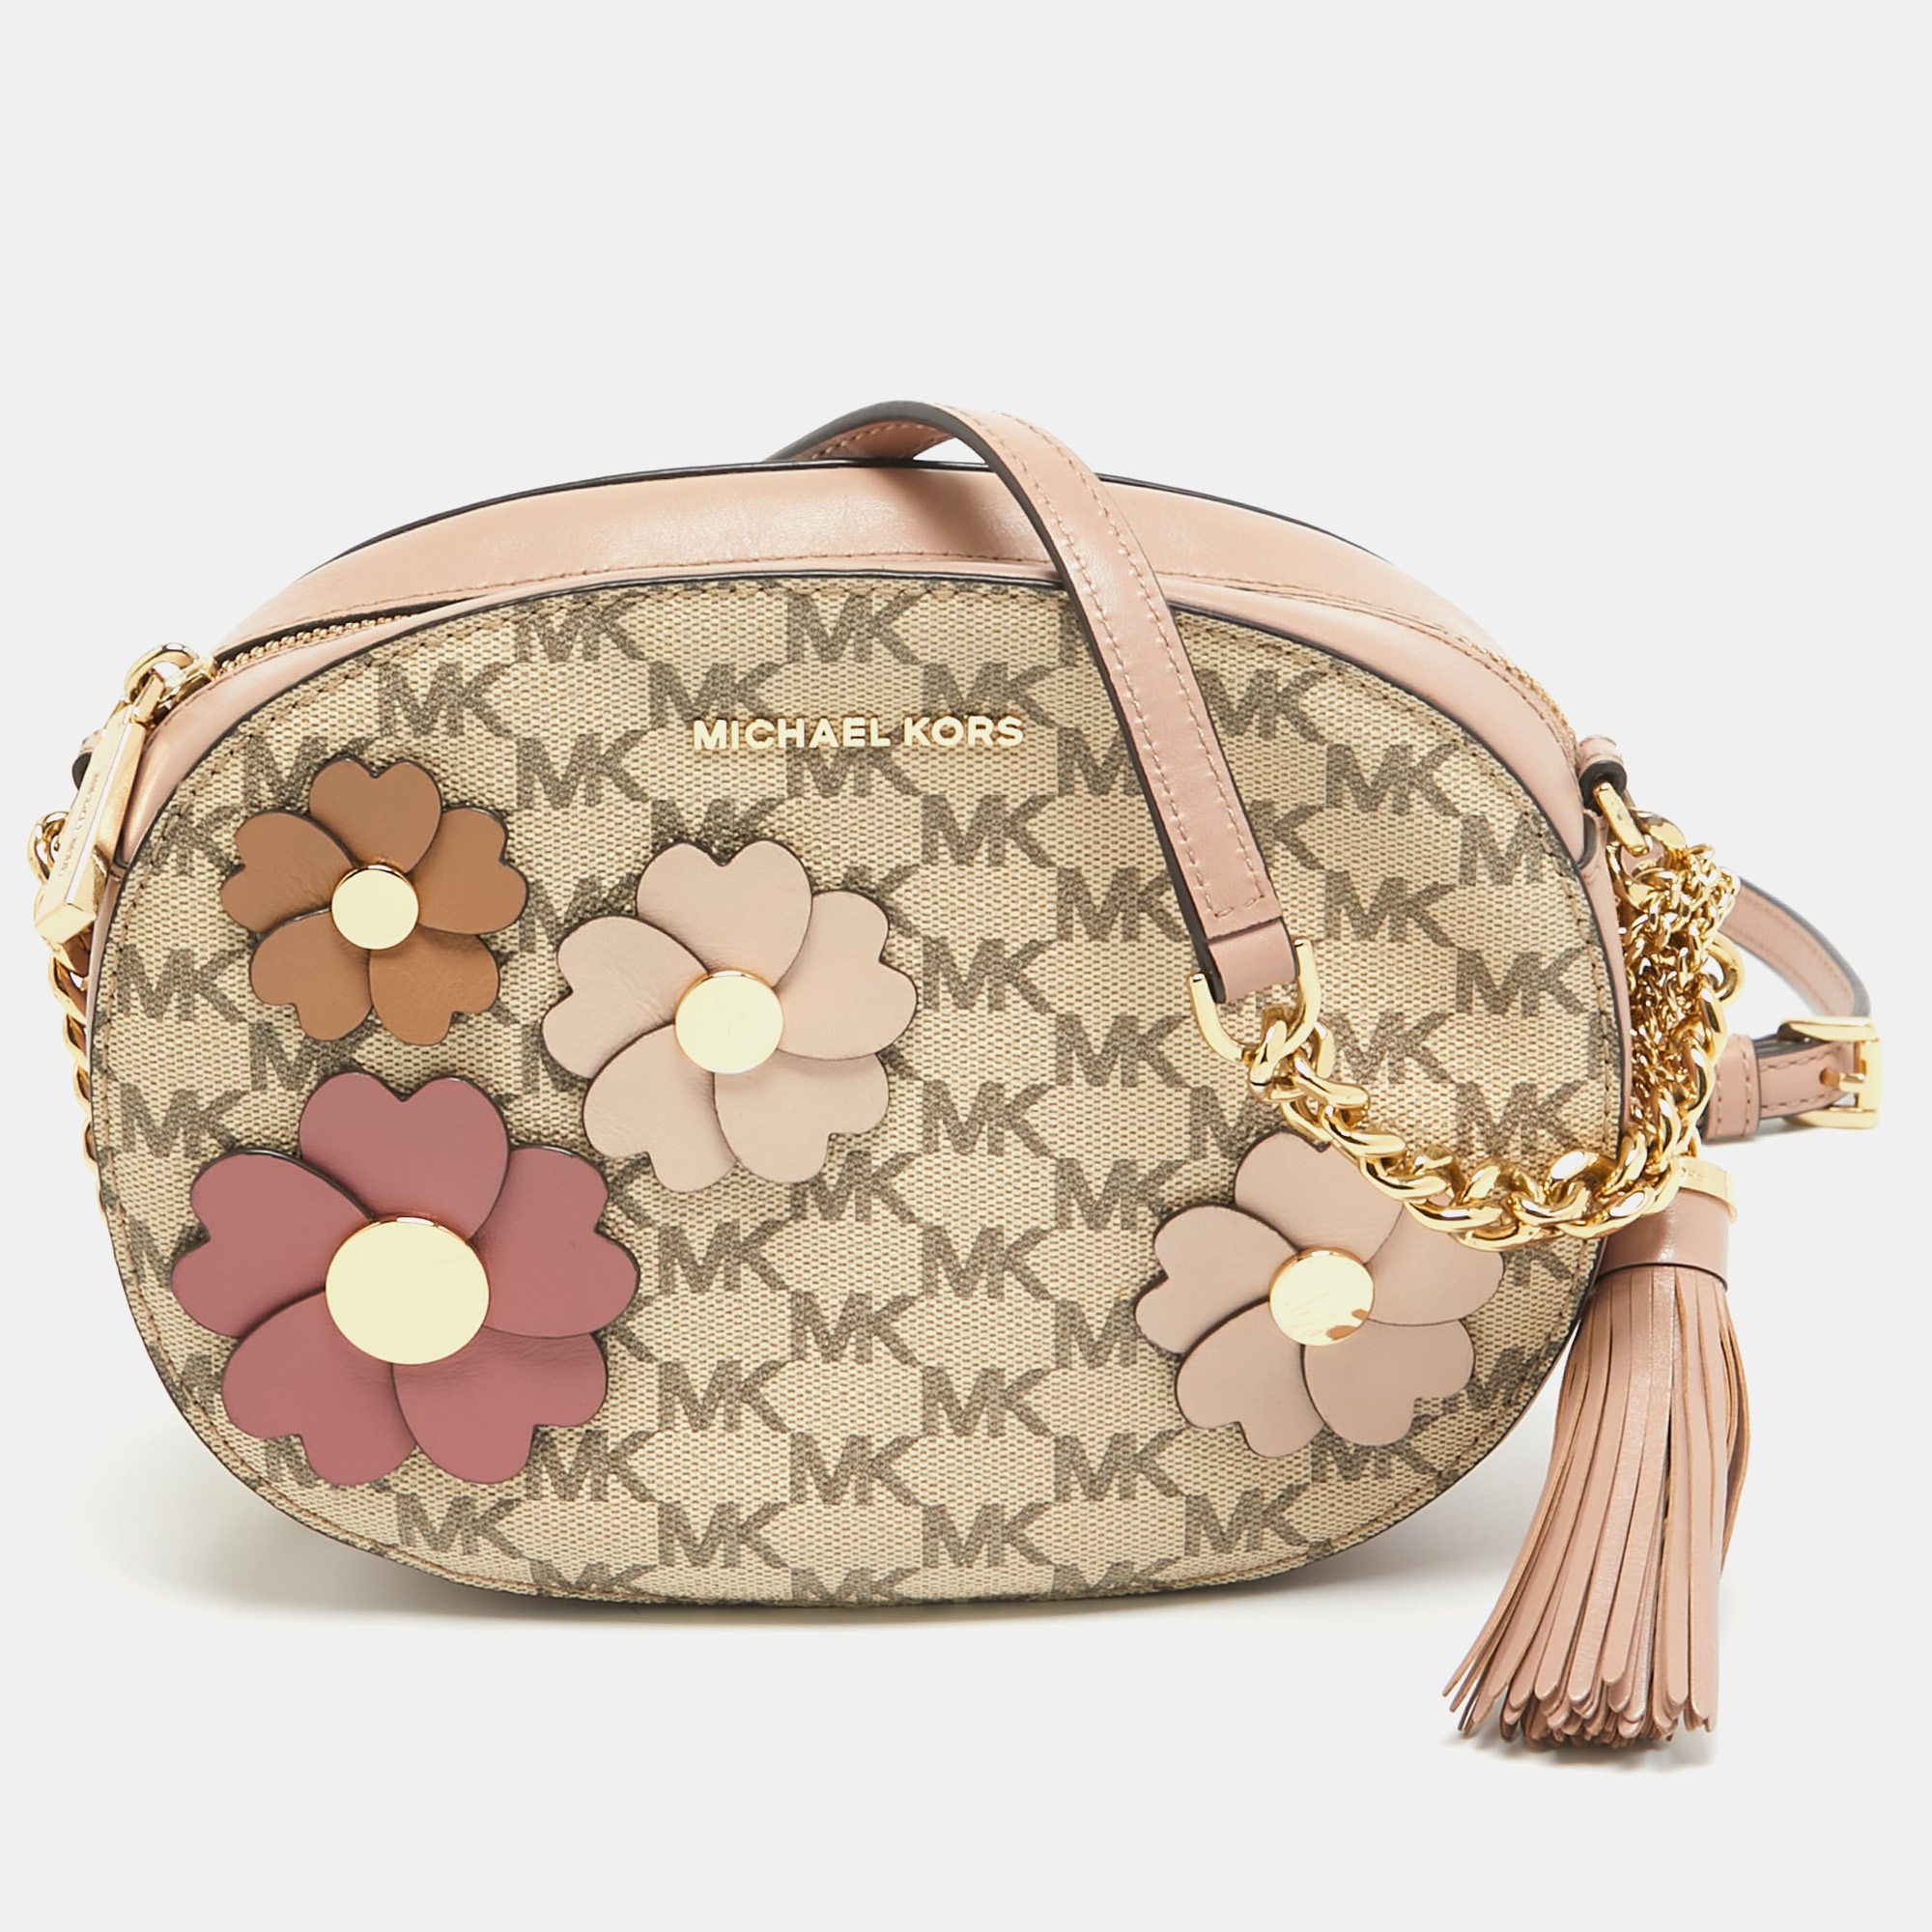 Michael kors old rose/beige signature coated canvas and leather floral applique ginny crossbody bag